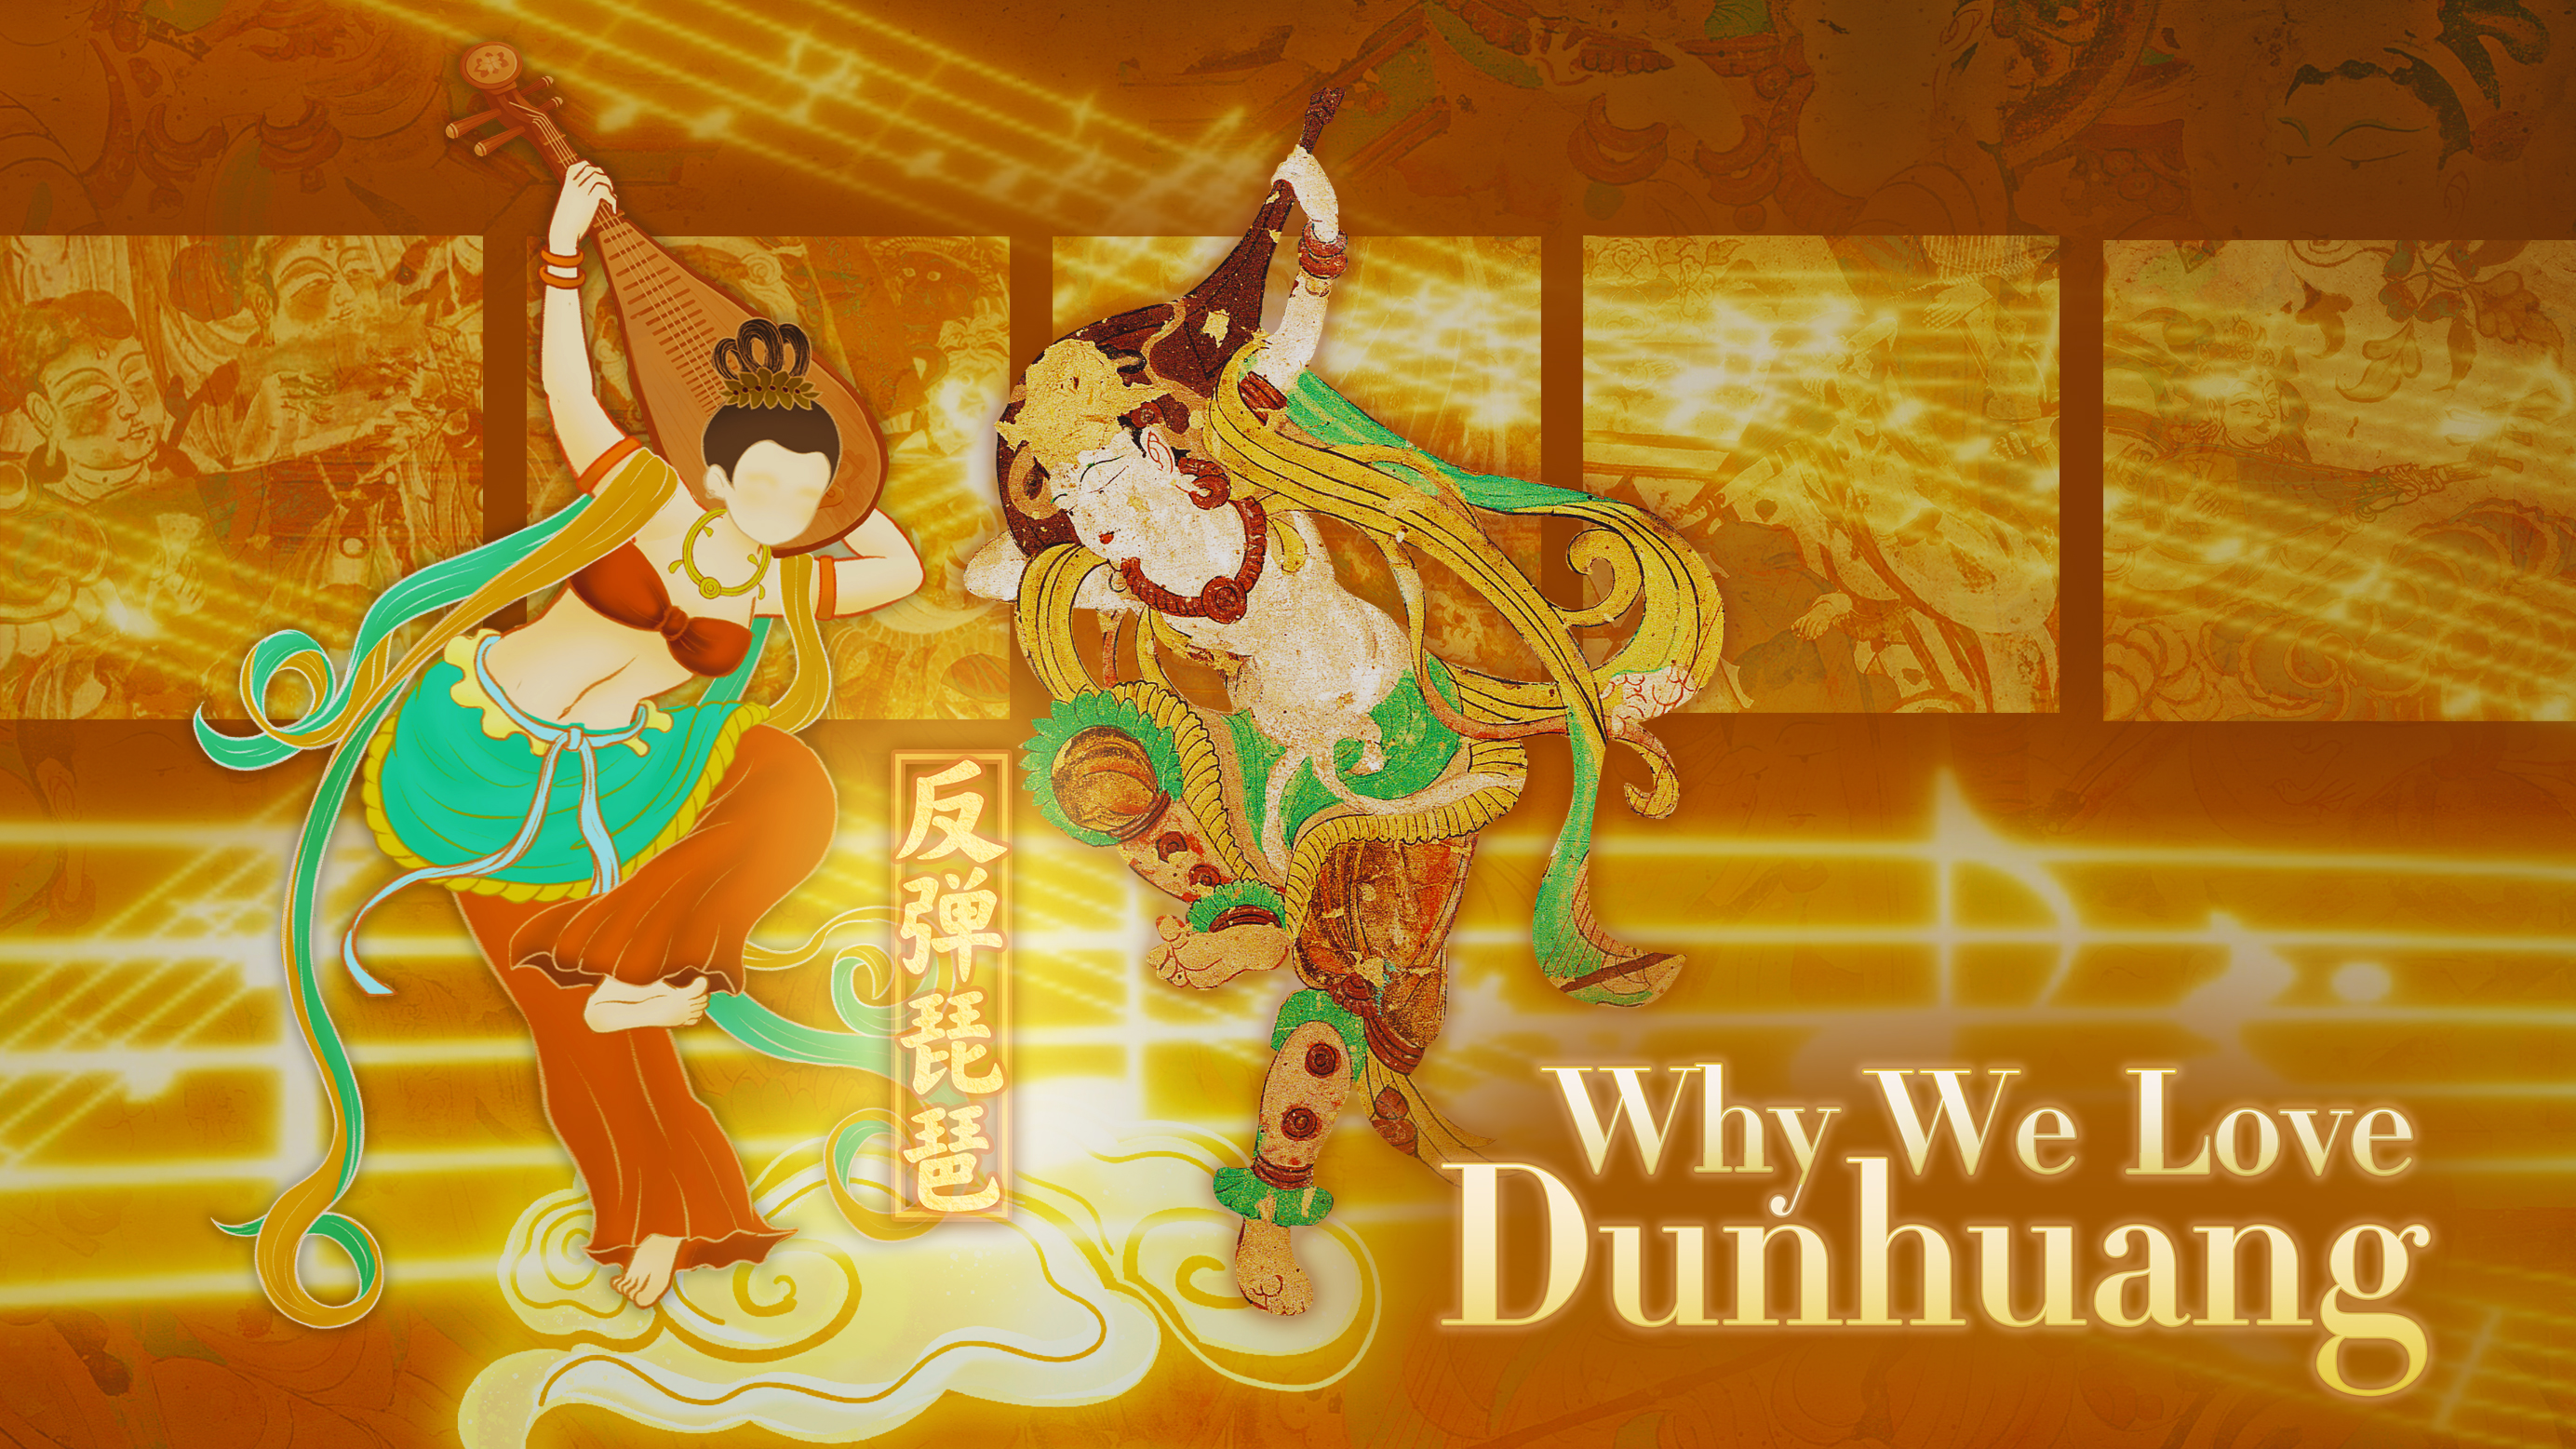 Why We Love Dunhuang: The most beautiful dance in Dunhuang